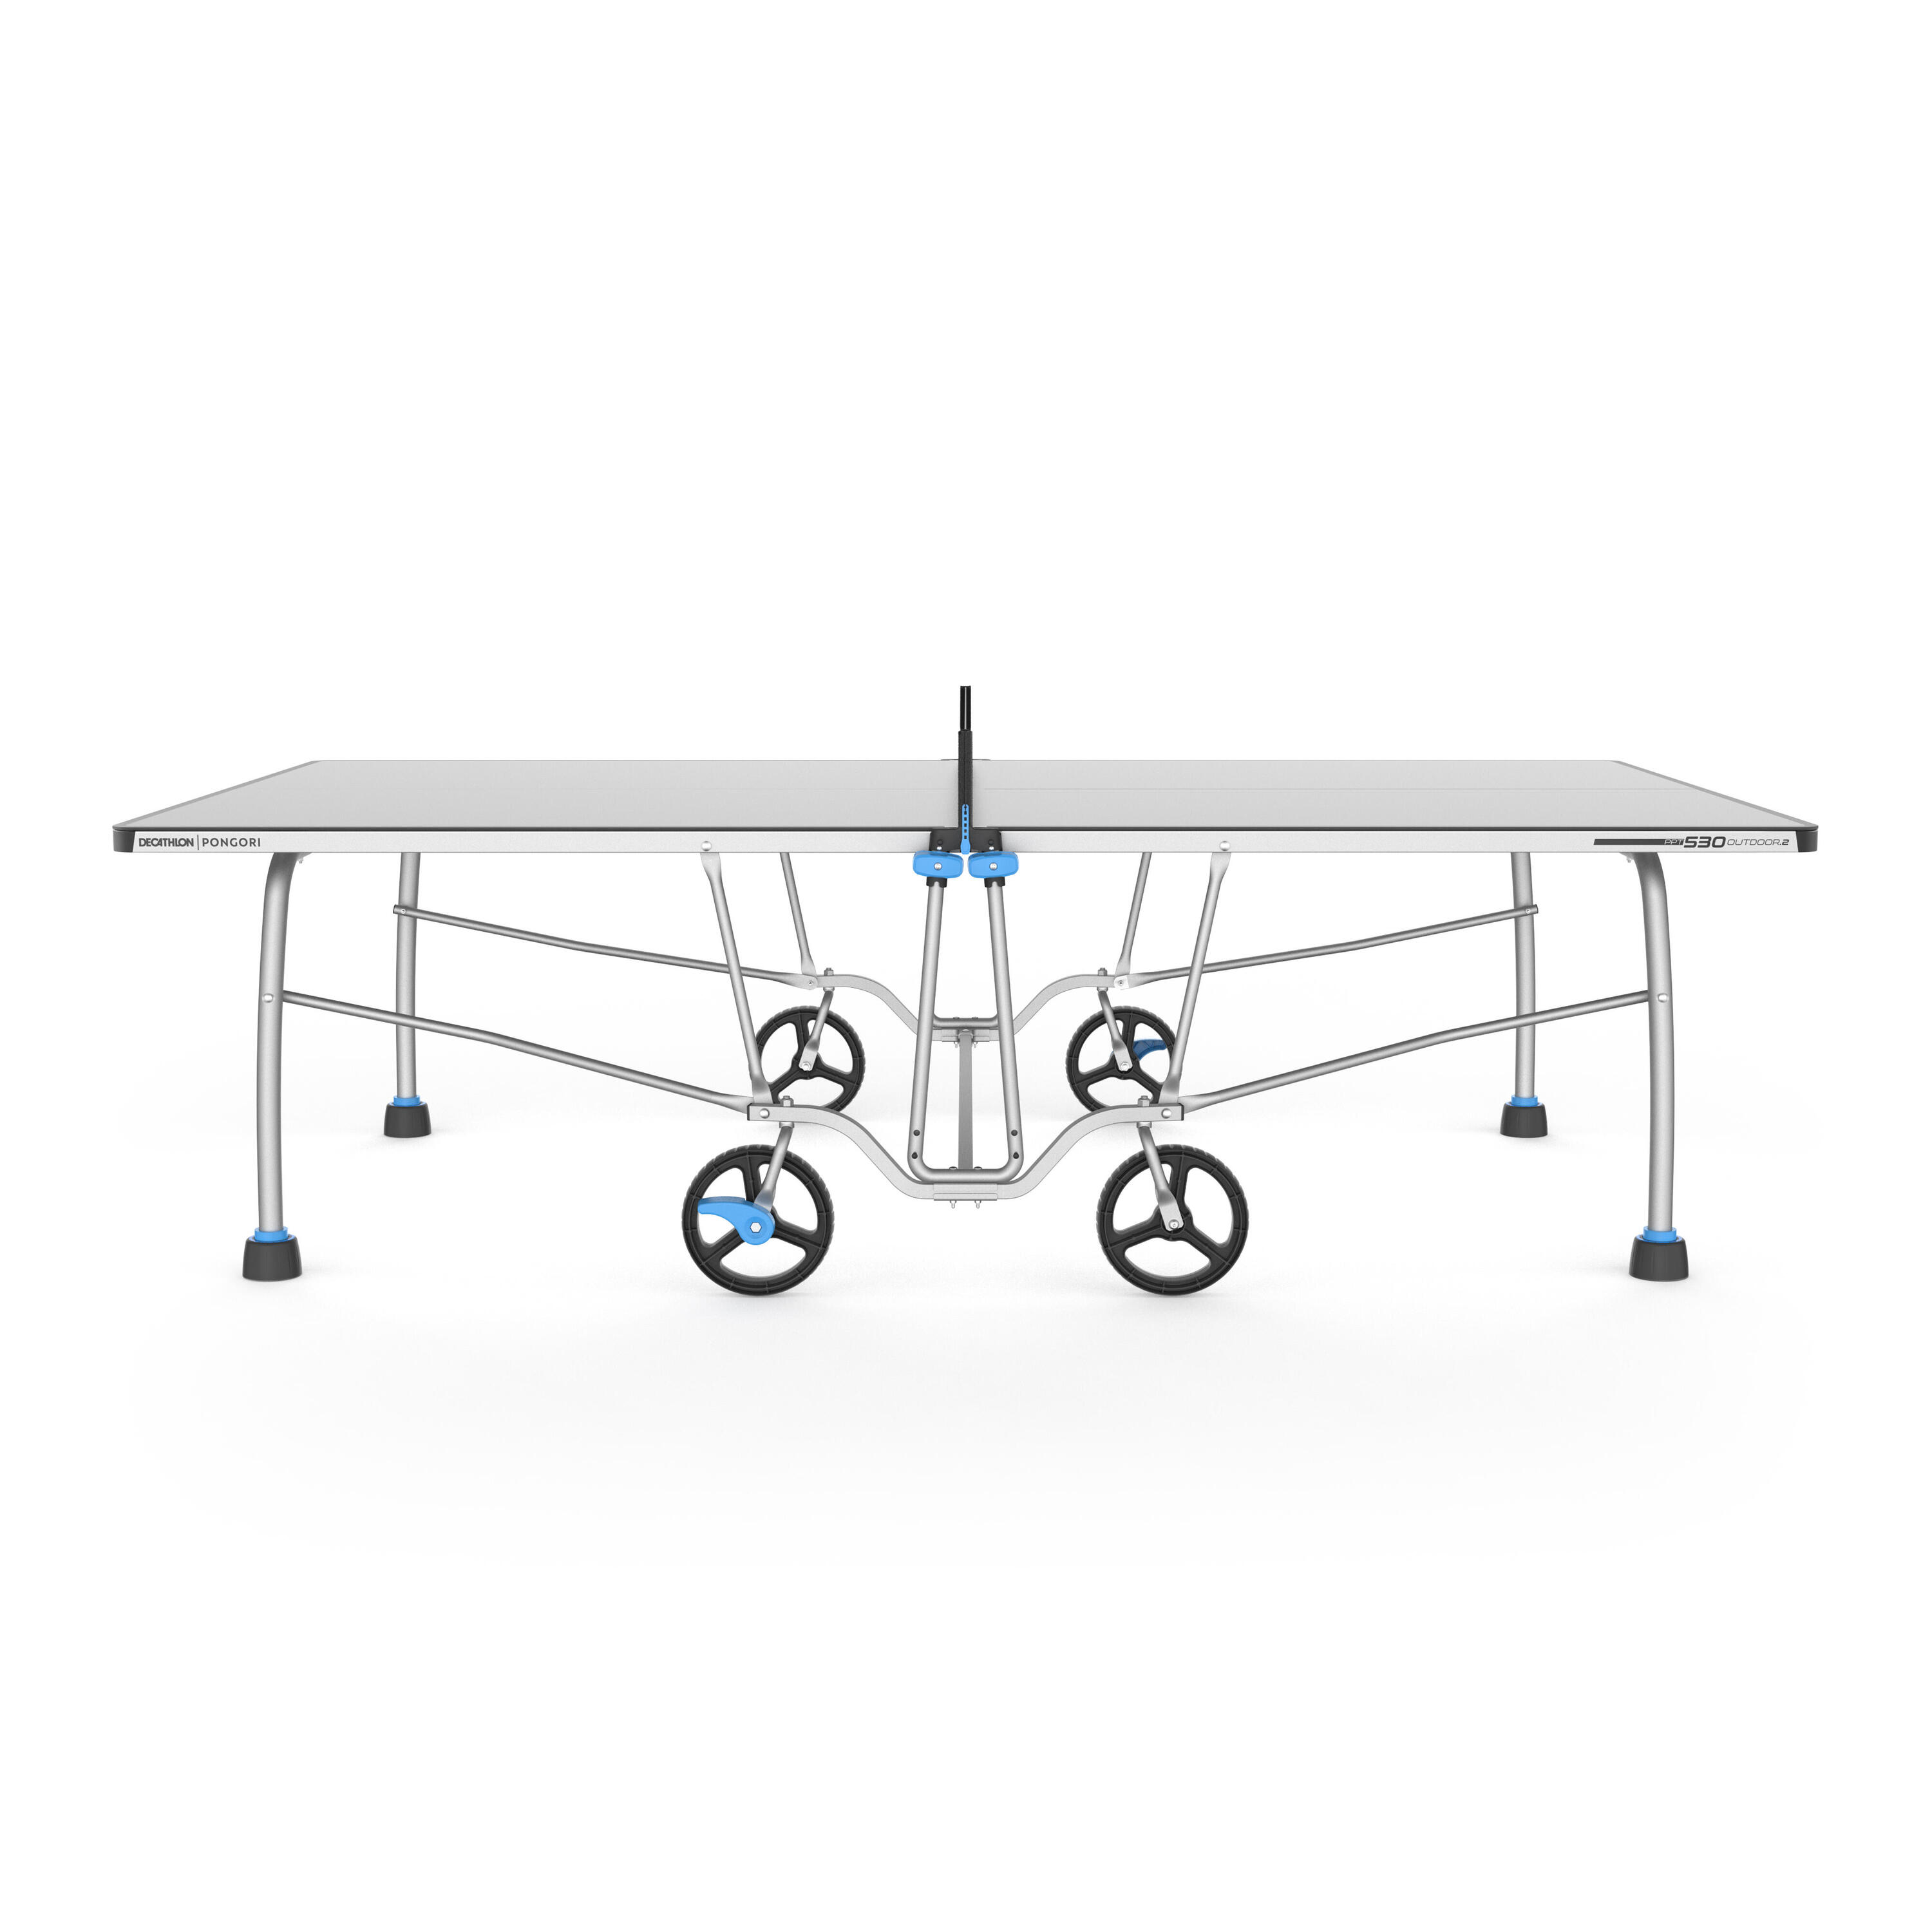 Outdoor Table Tennis Table PPT 530.2 - Grey 10/13